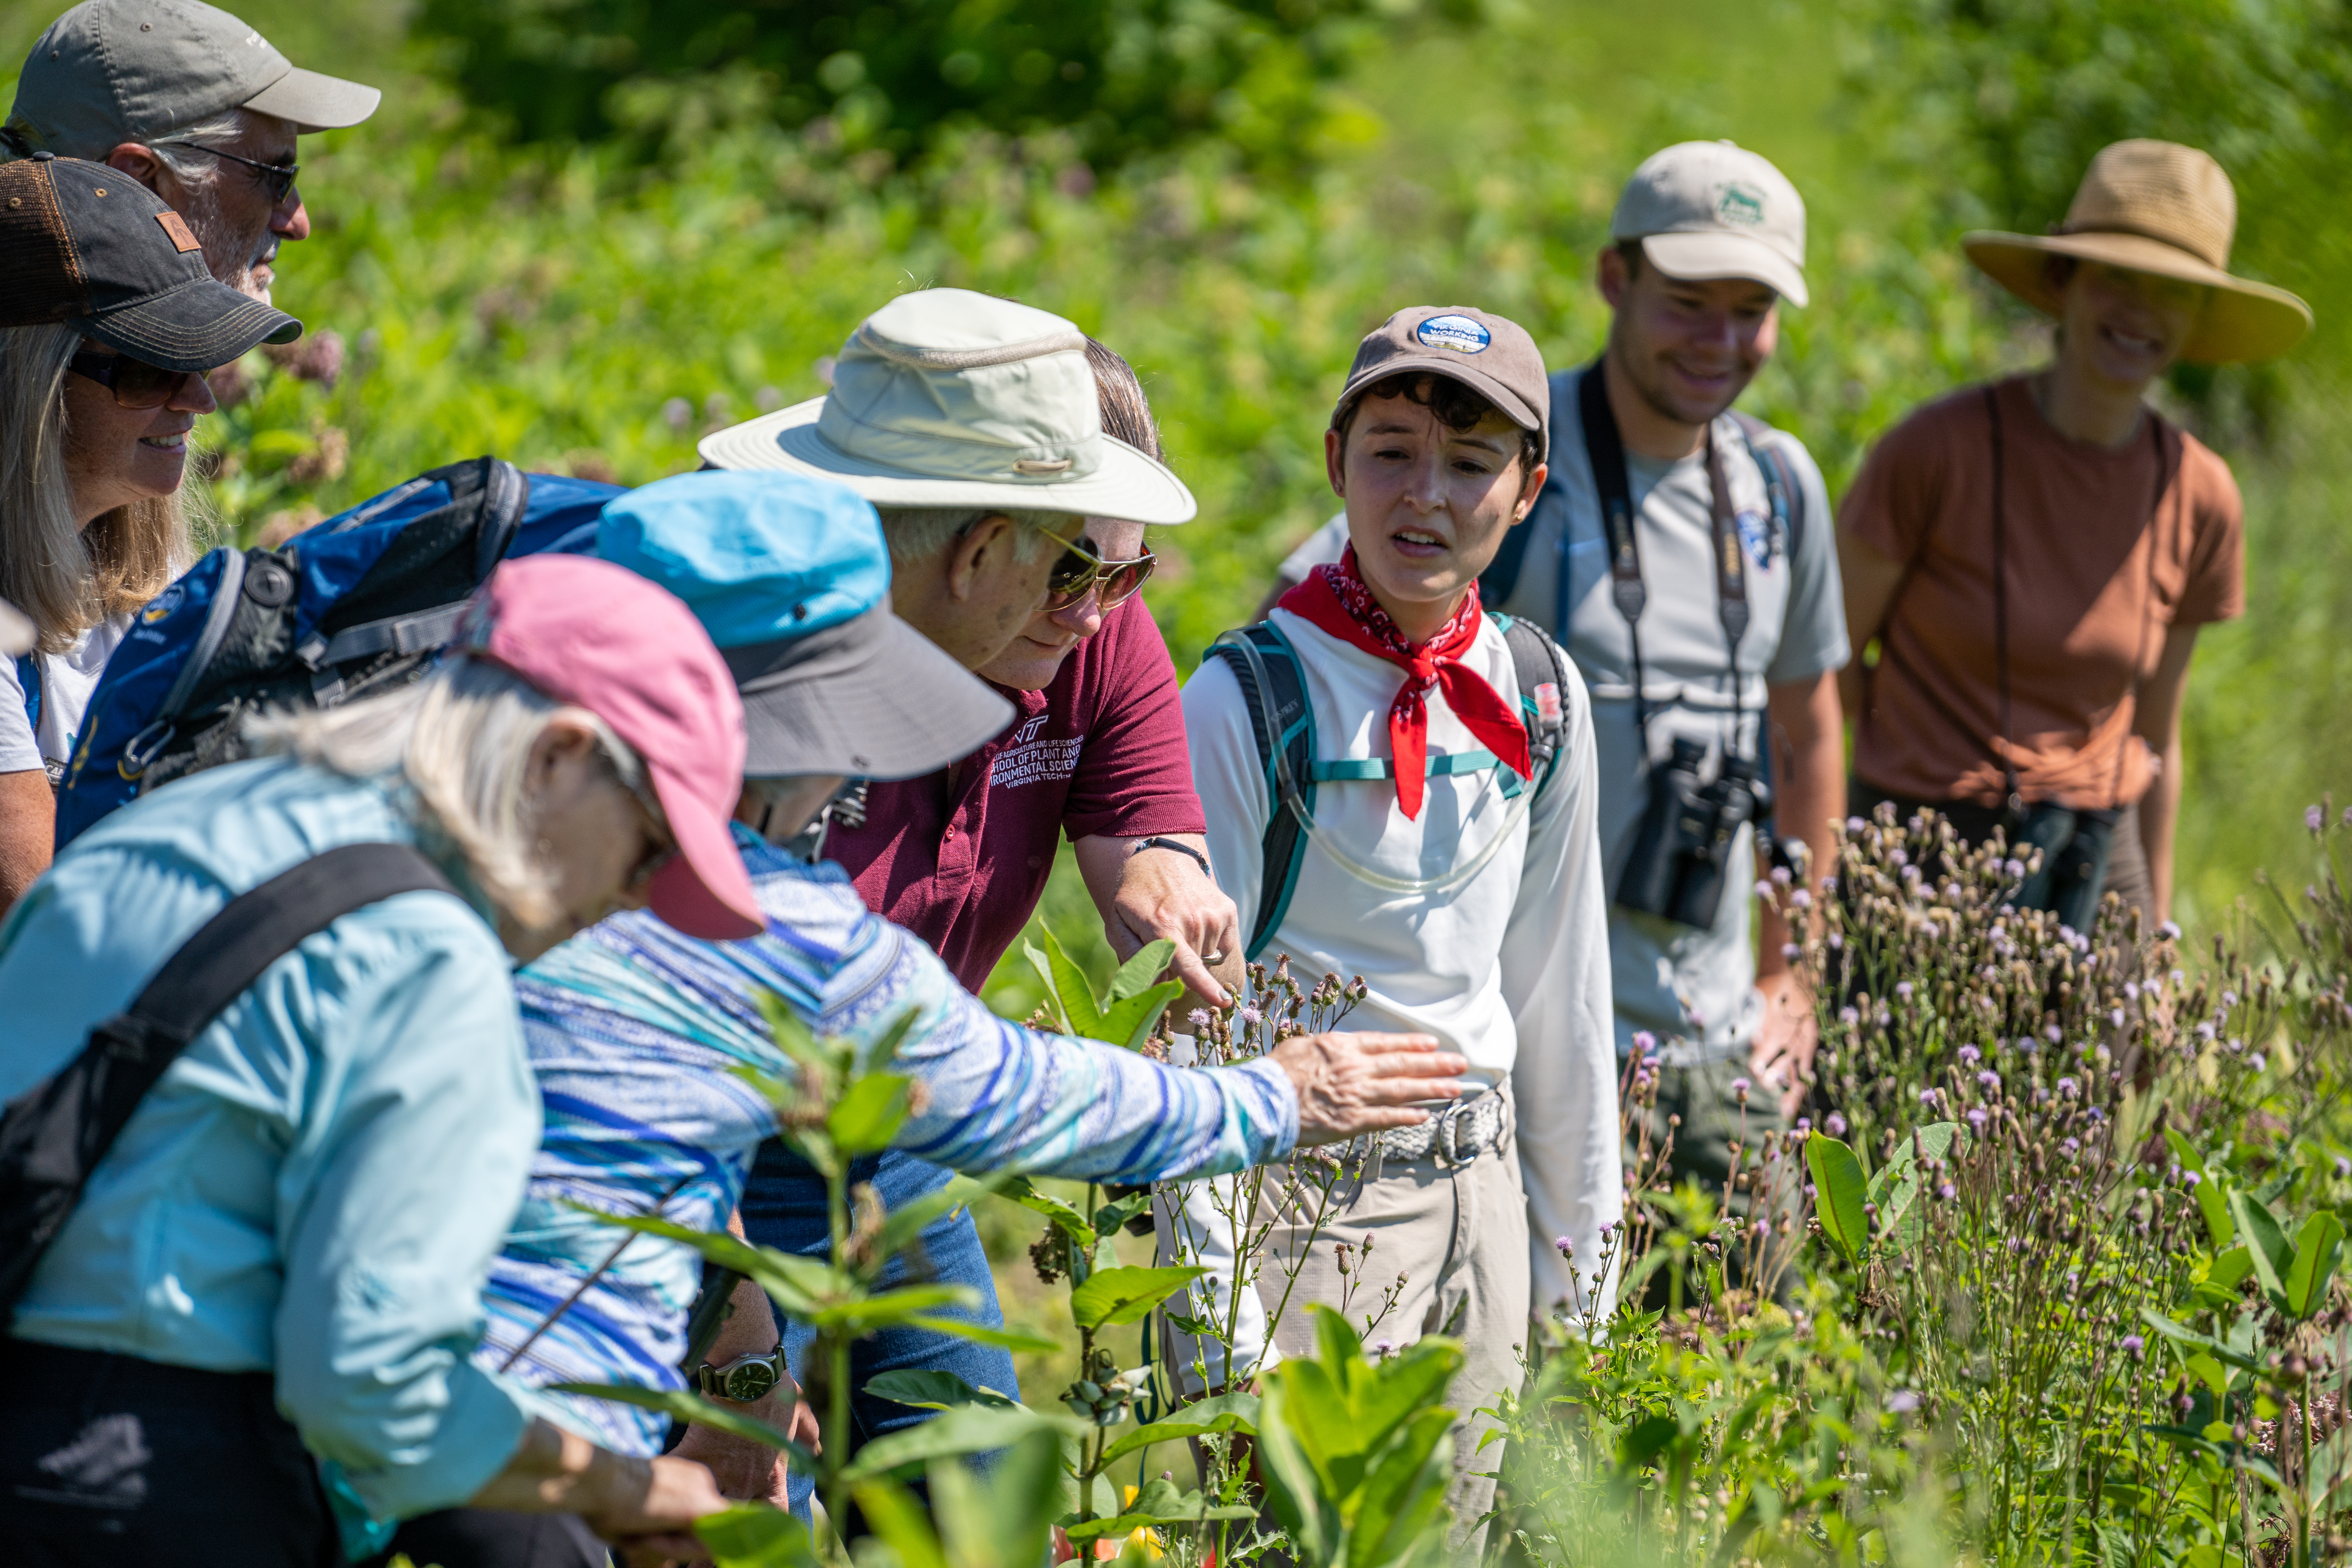 Group looking at insects visiting milkweed flowers